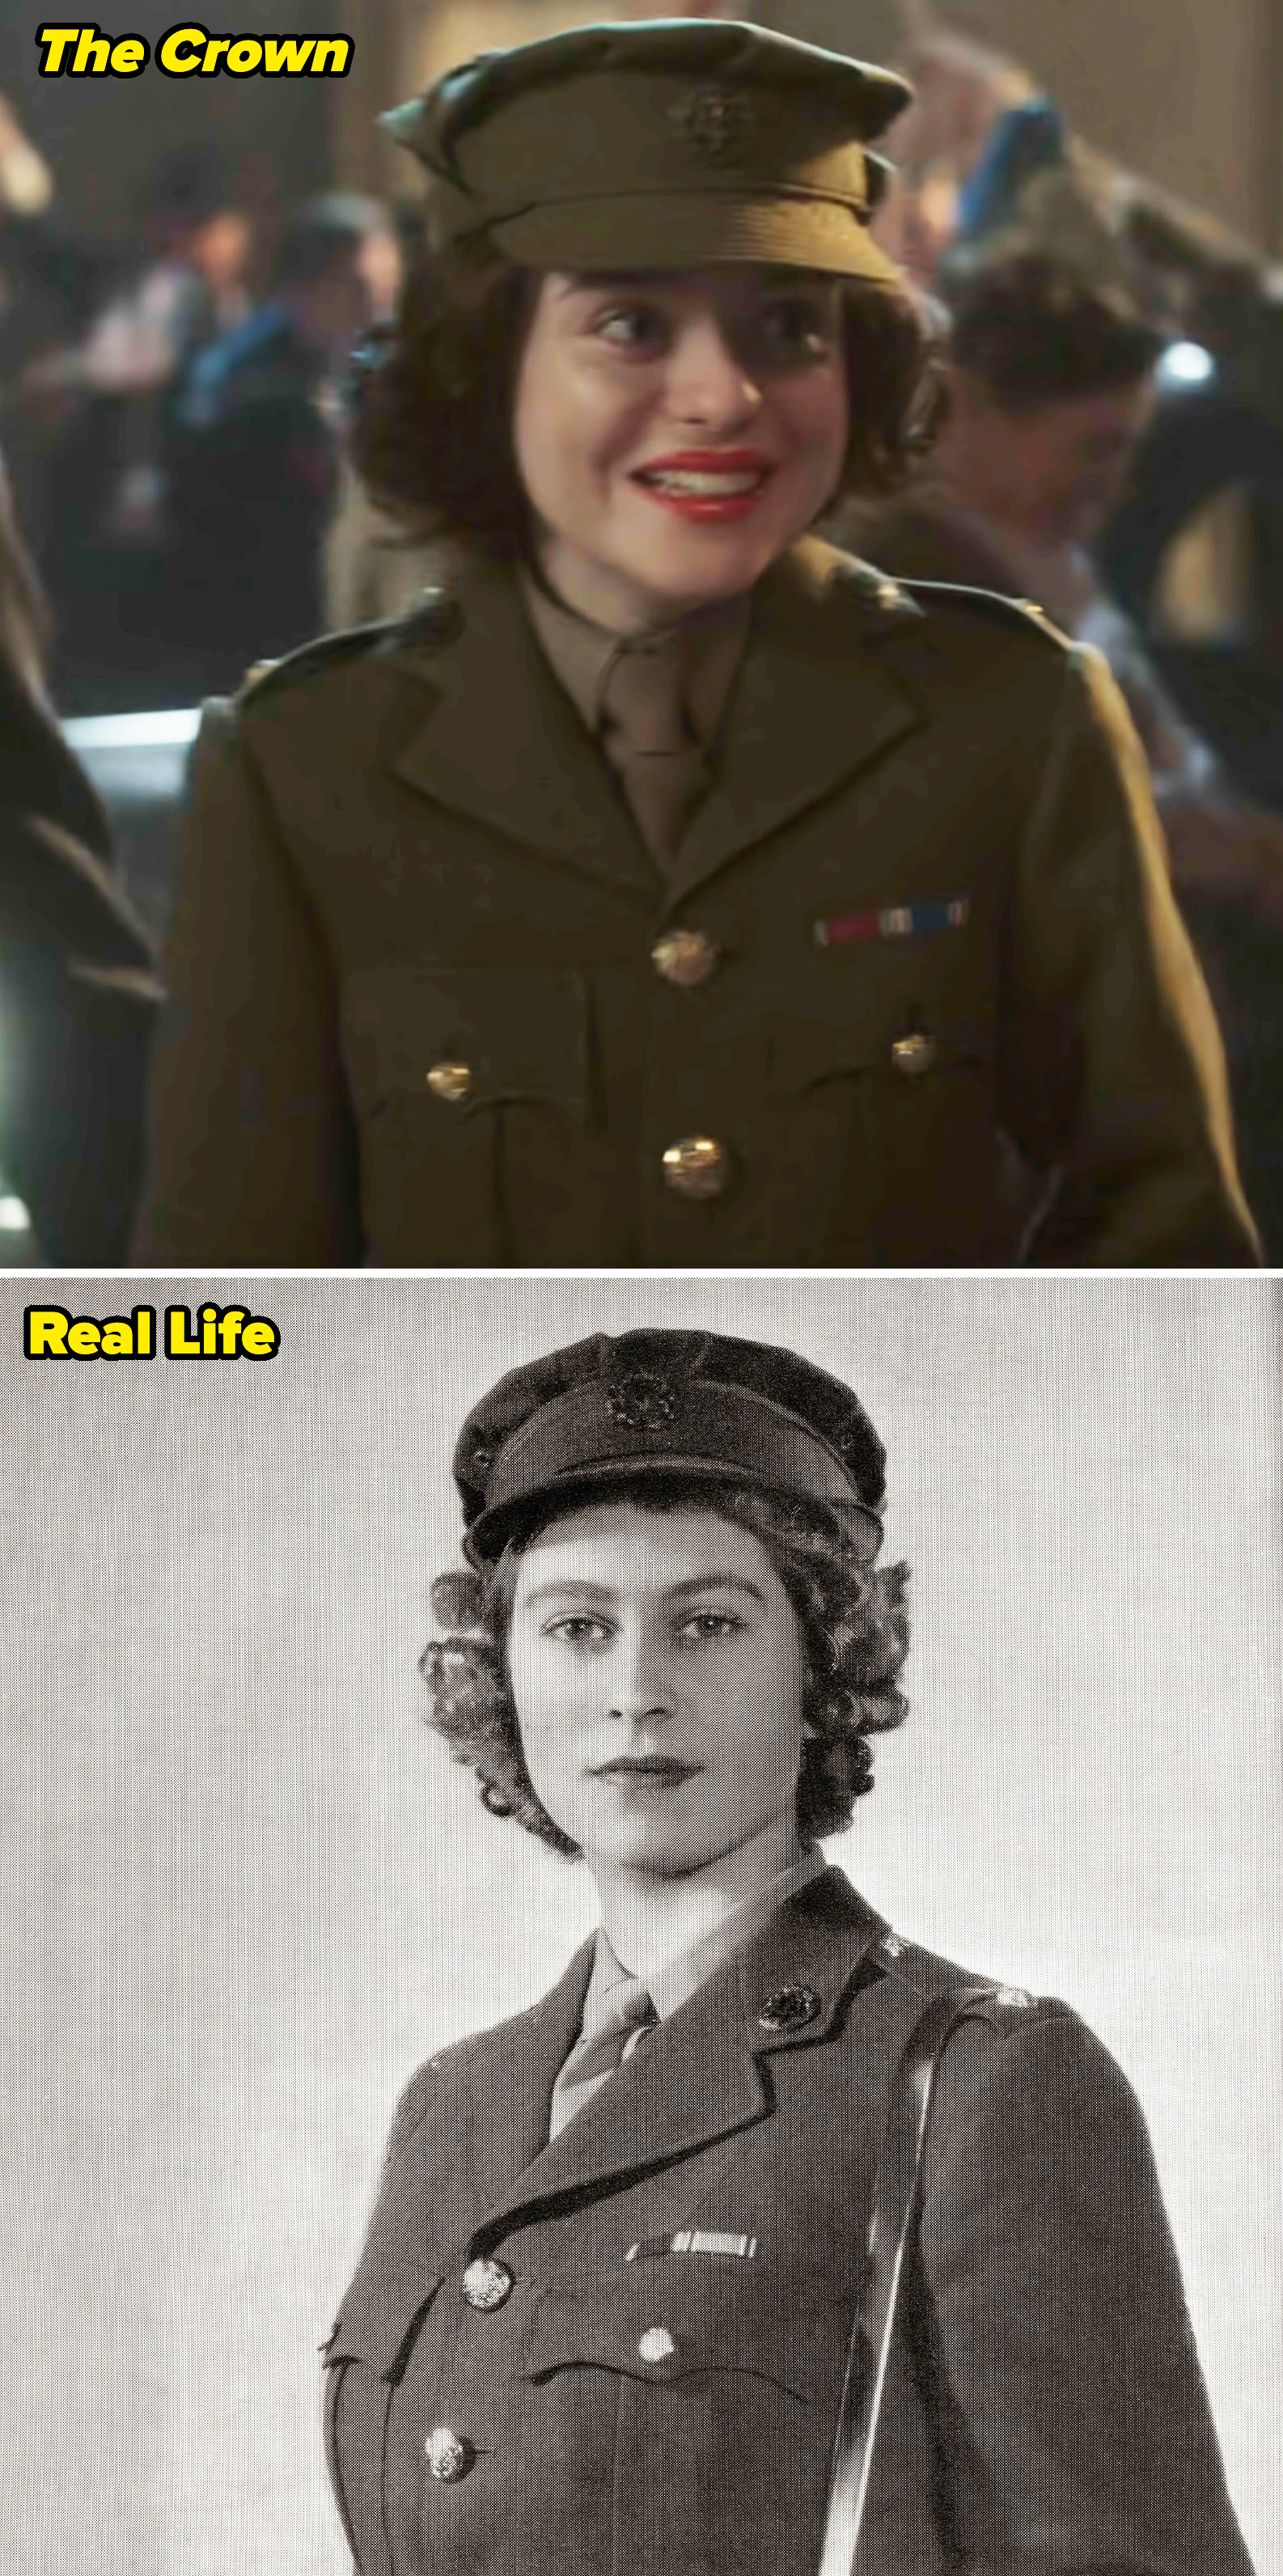 Princess Elizabeth in real life vs. &quot;The Crown&quot;